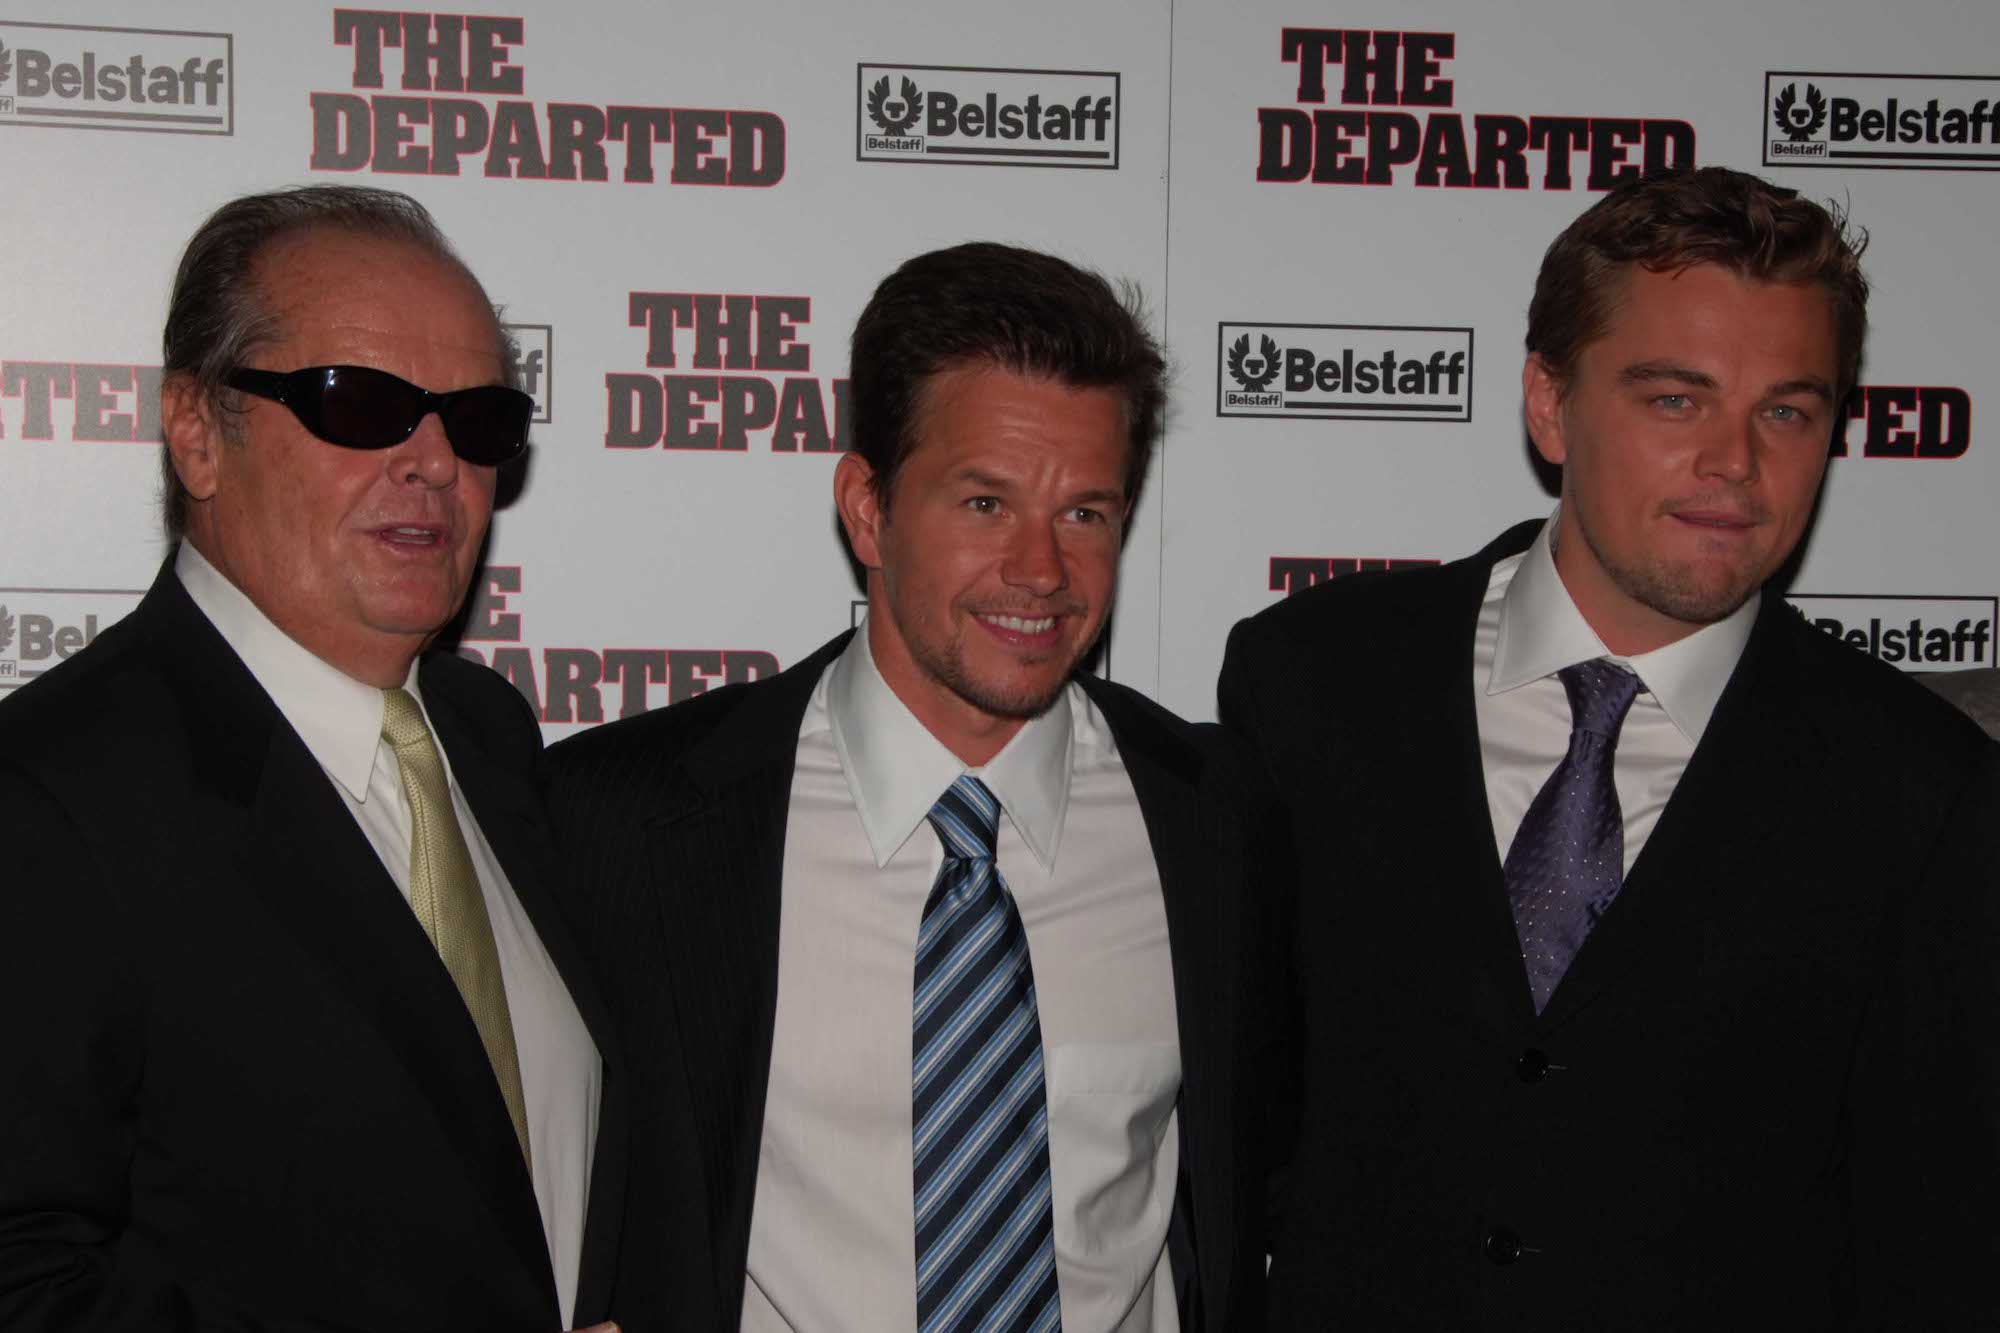 (L-R) Jack Nicholson, Mark Wahlberg, and Leonardo DiCaprio smiling in front of a white background